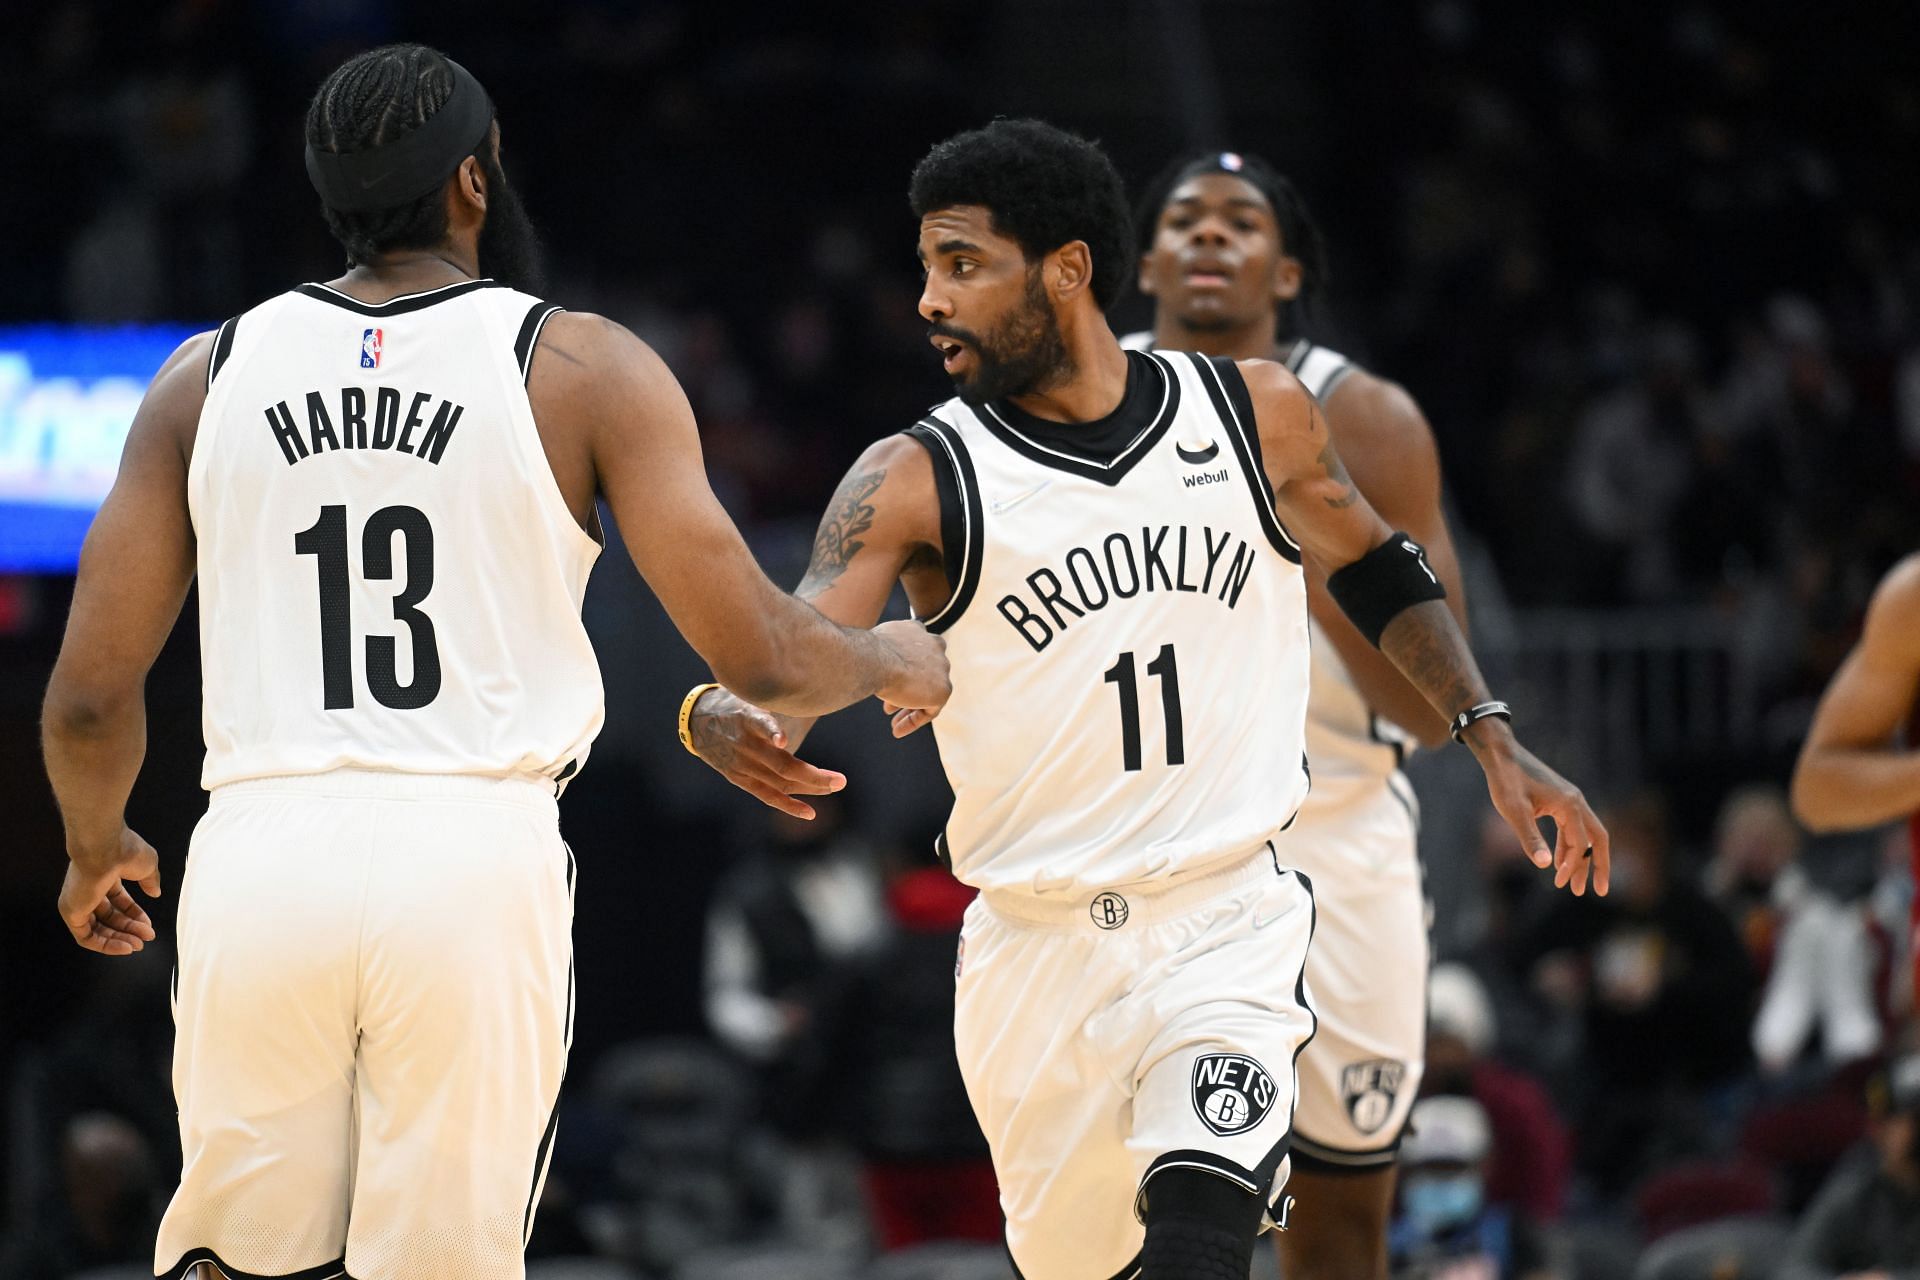 Brooklyn Nets stars Kyrie Irving and James Harden celebrate after a score.